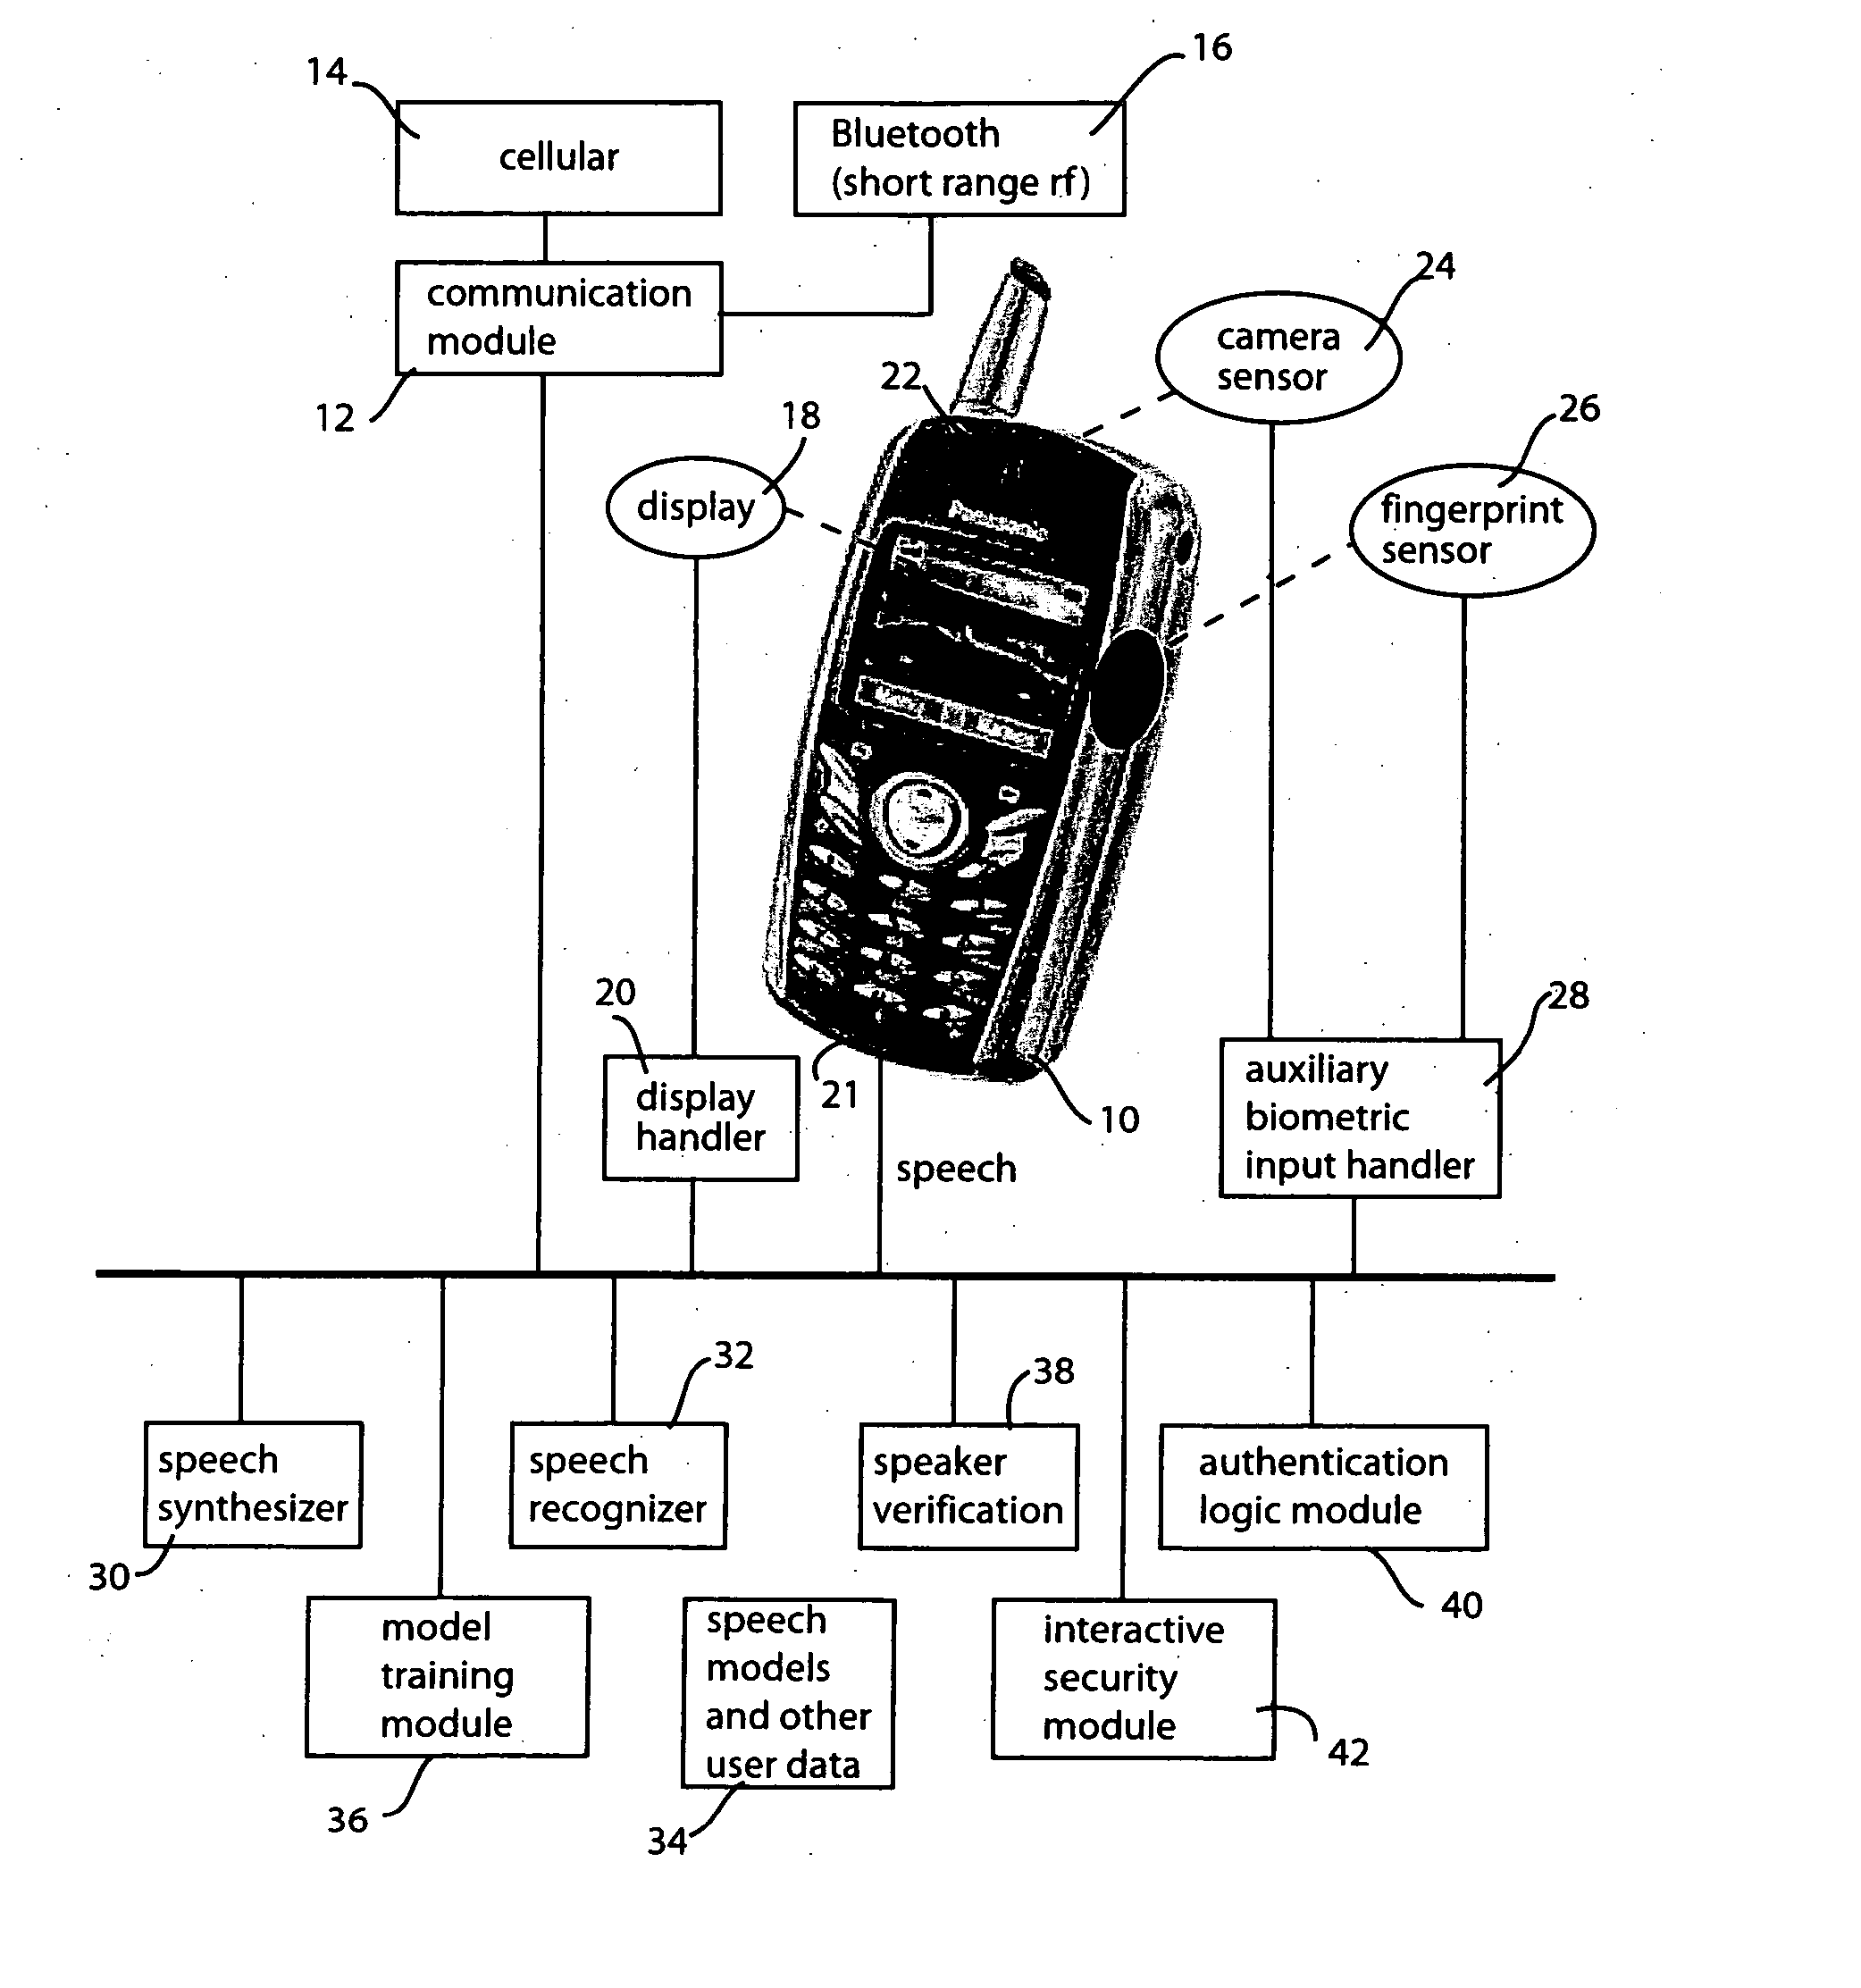 System and method for portable authentication